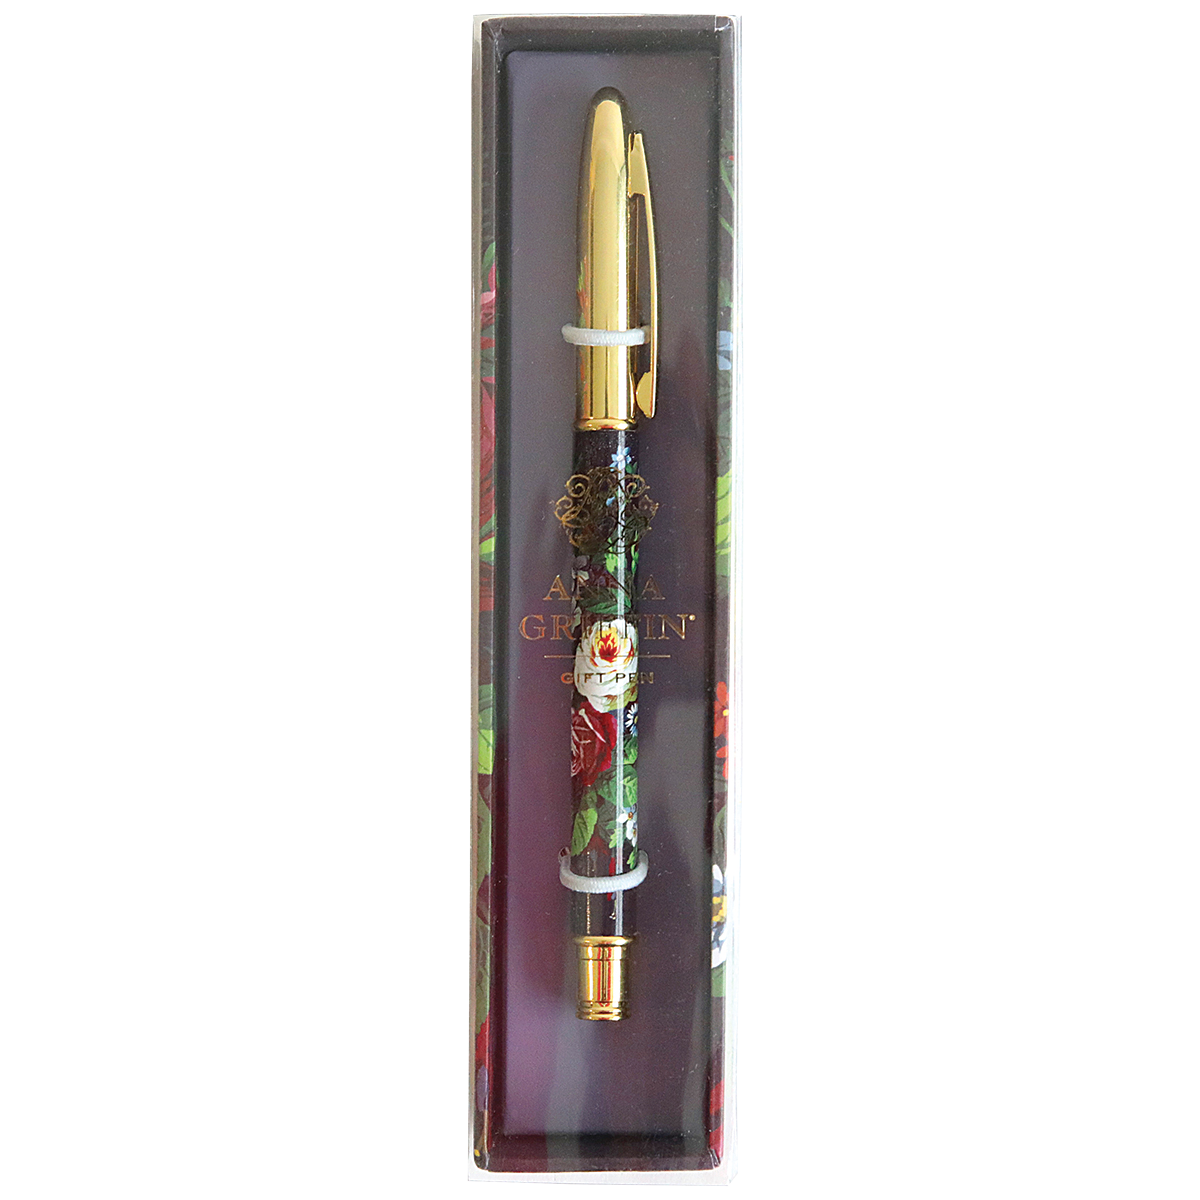 Astrid Floral Gift Pen packaged in a clear case with floral design elements, perfect for stationery enthusiasts.